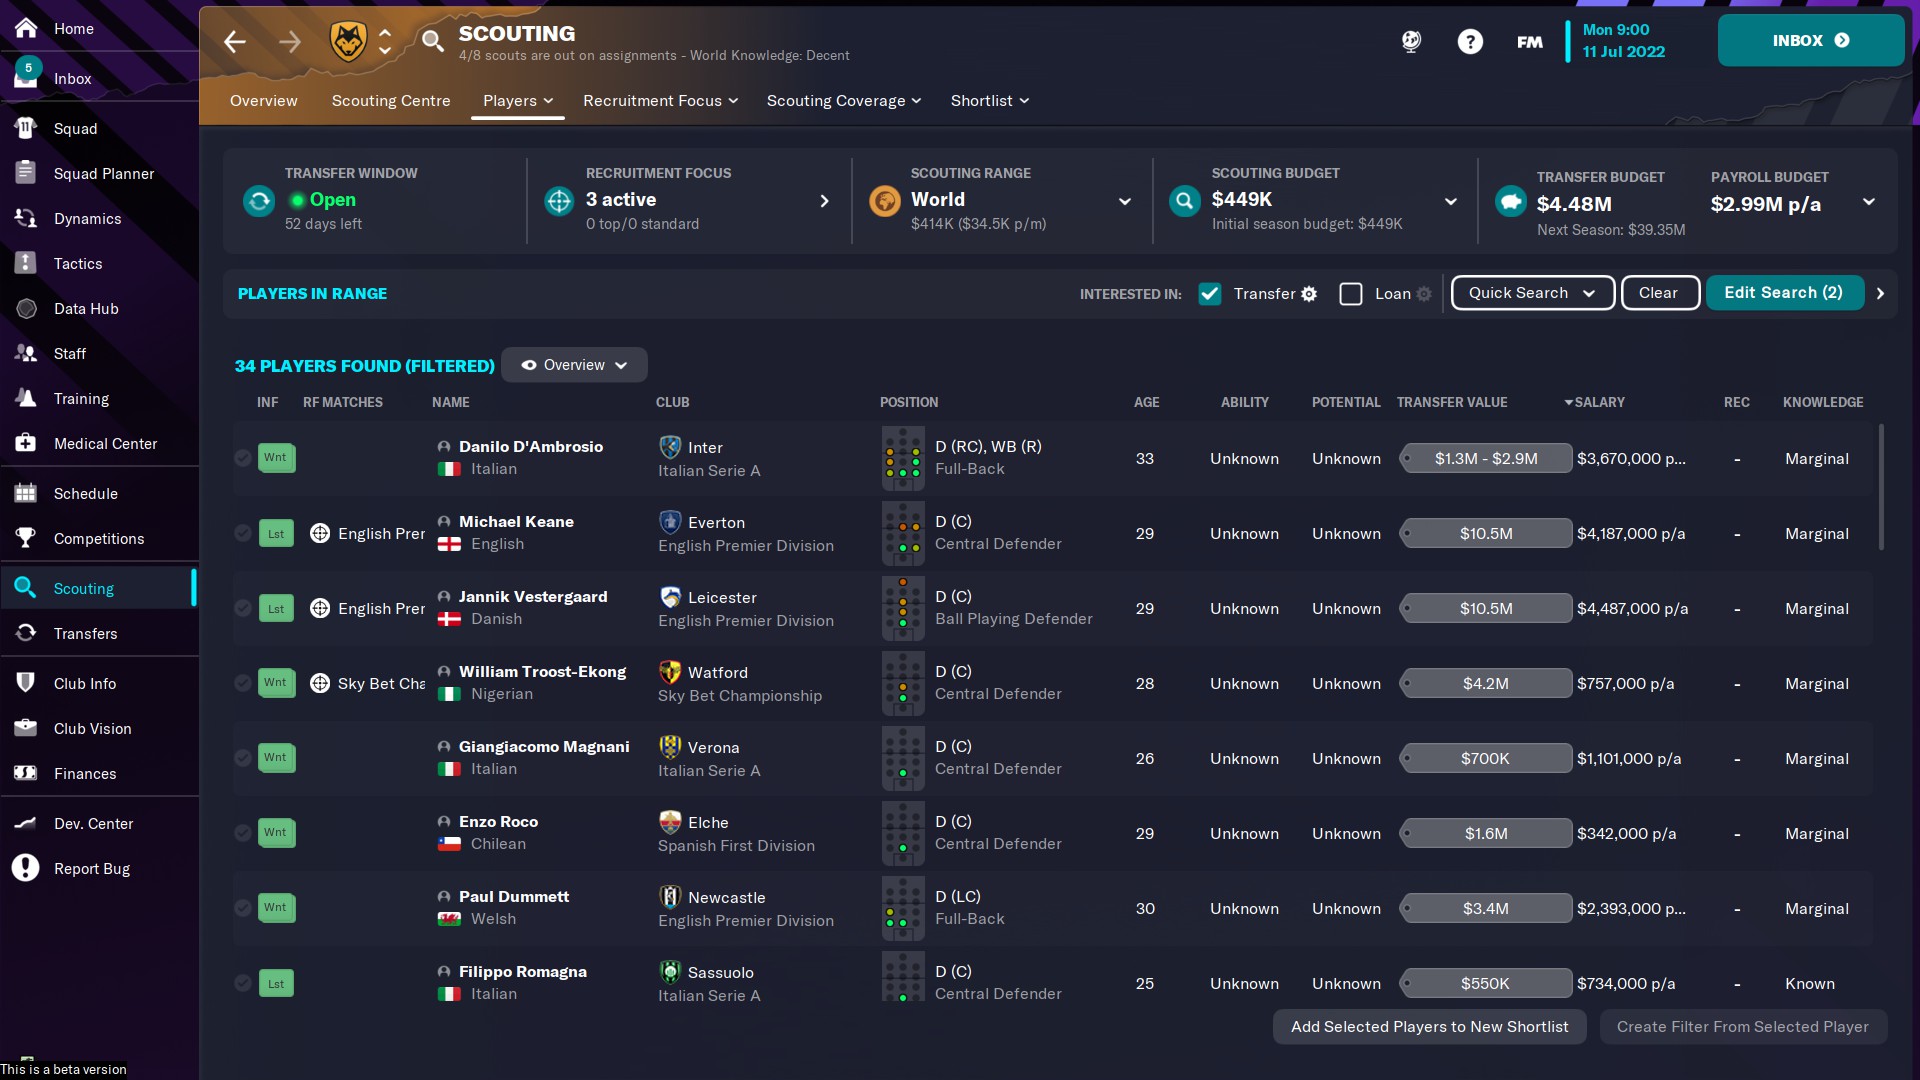 Football Manager 2023 - Guide to Managing a New Club - Scouting and Transfers - 84A47A8